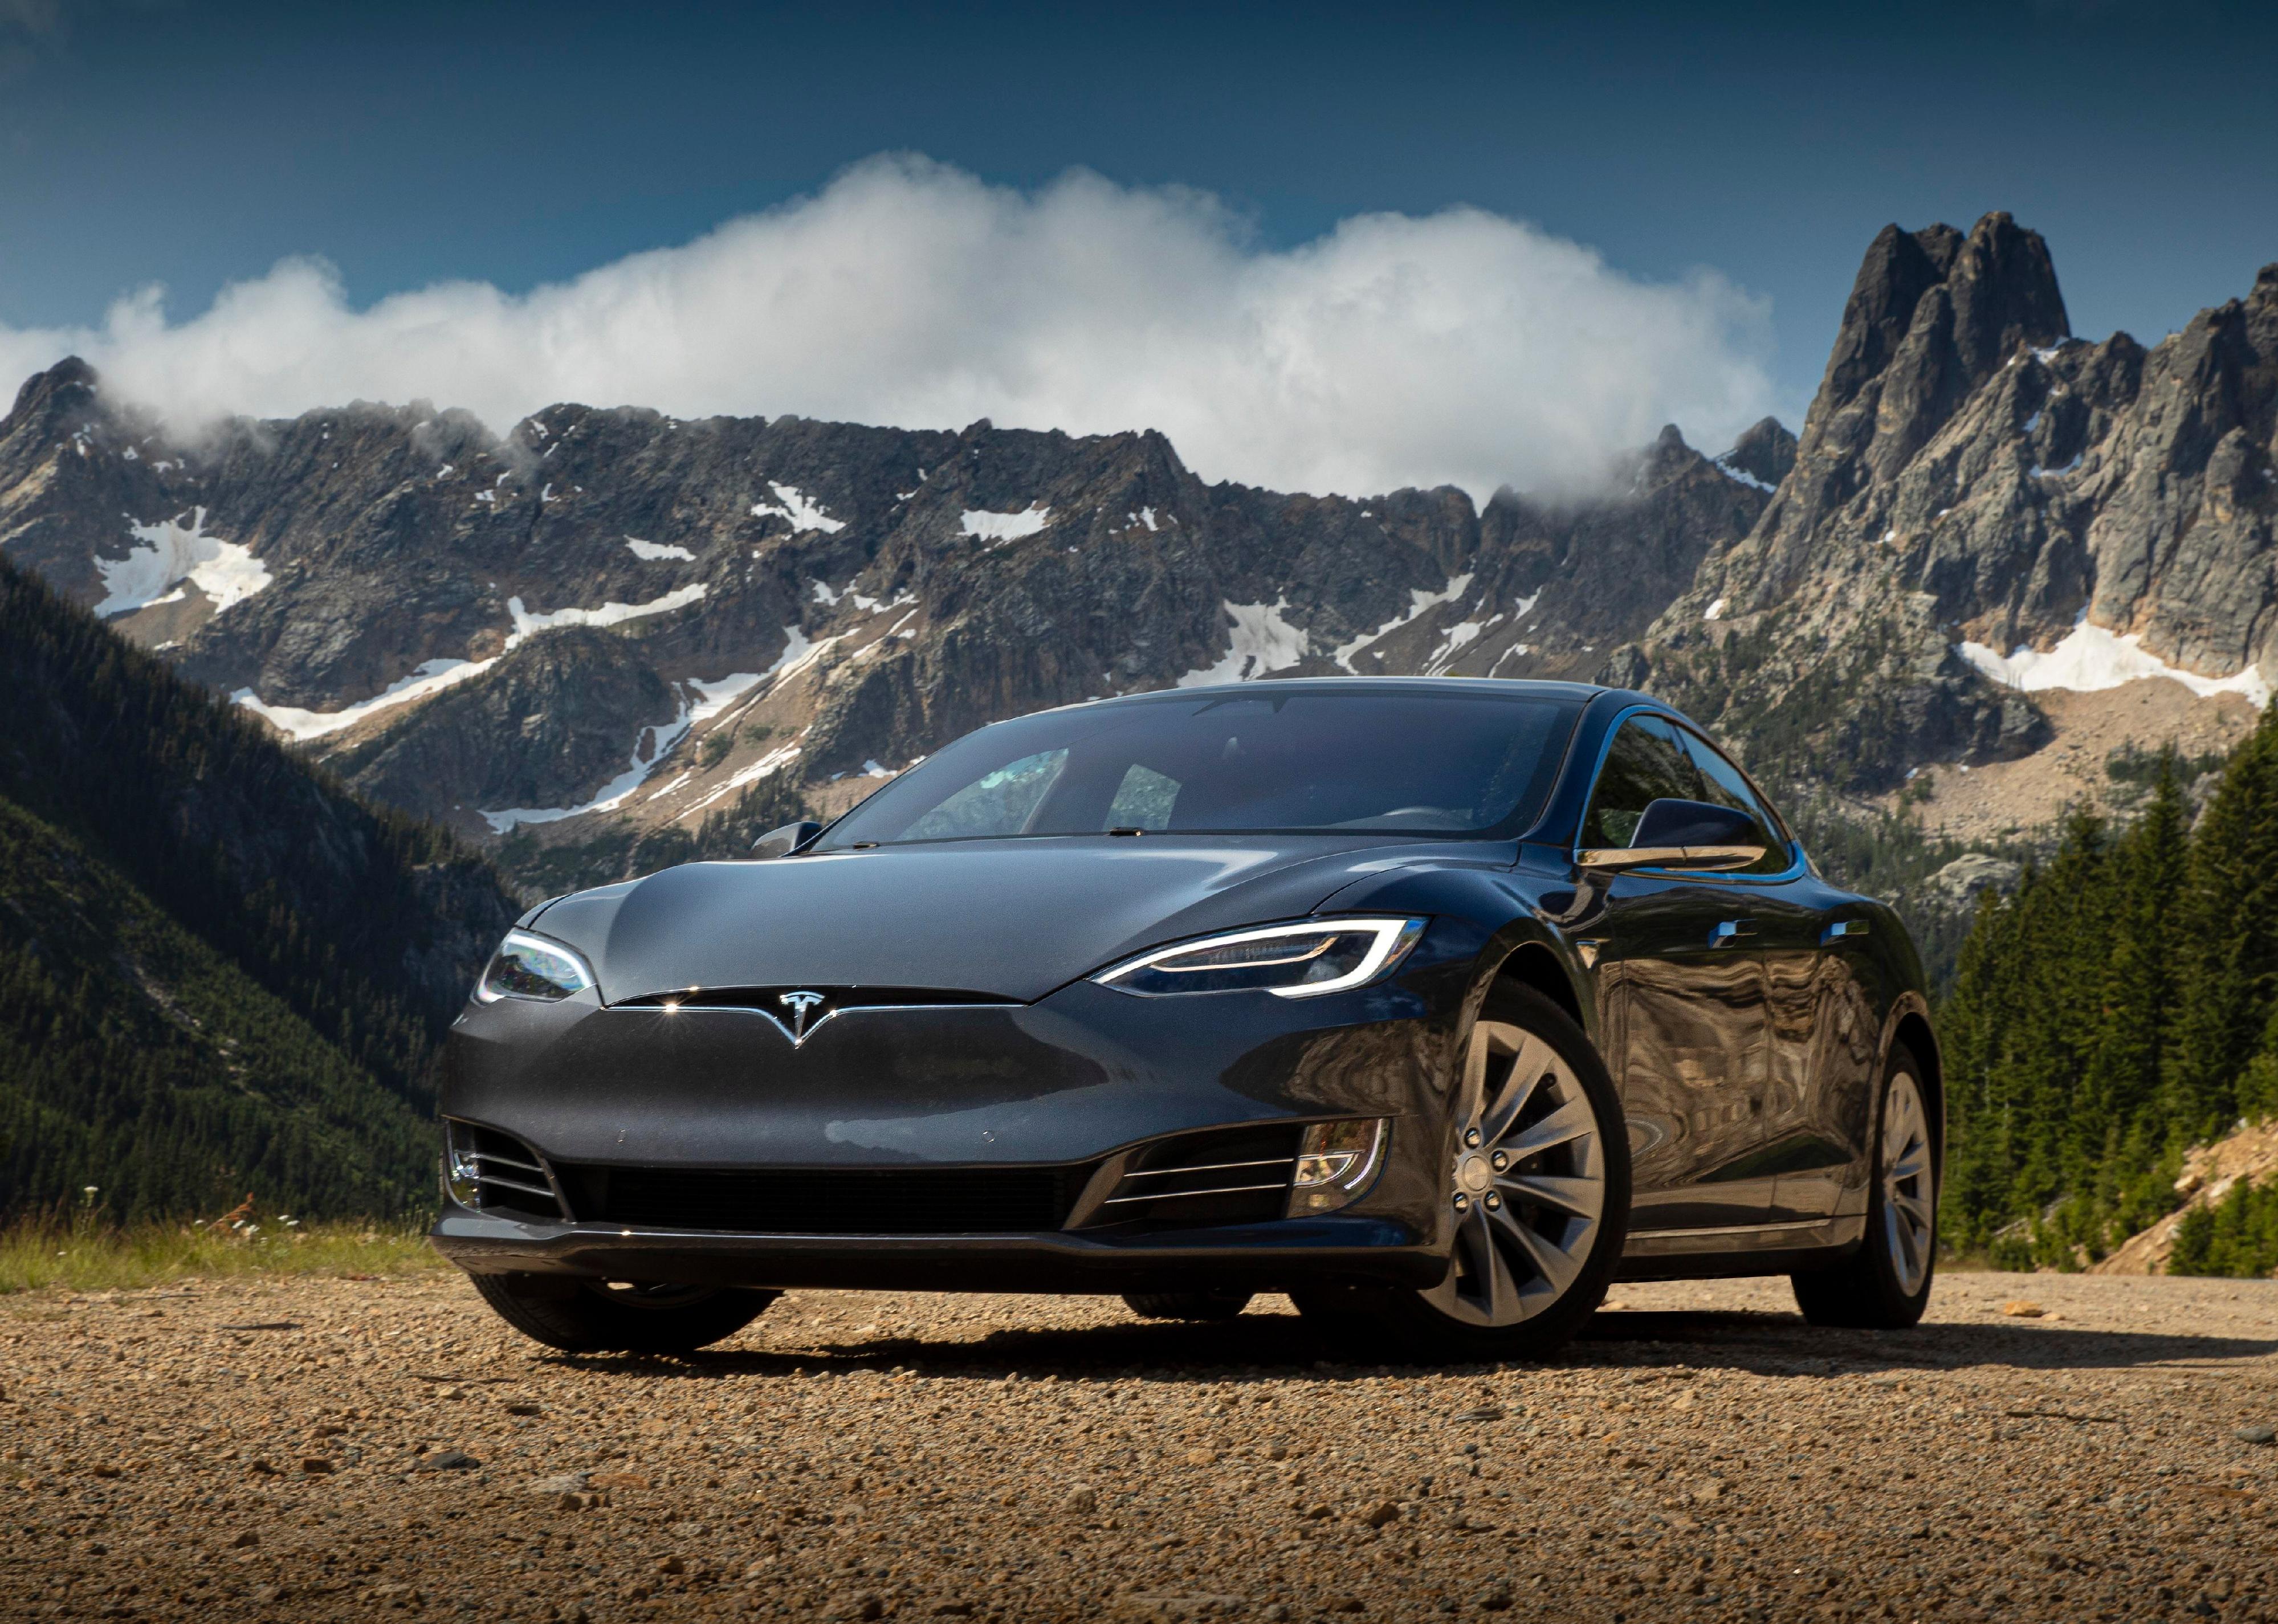 Tesla model 3 in front of a mountain.